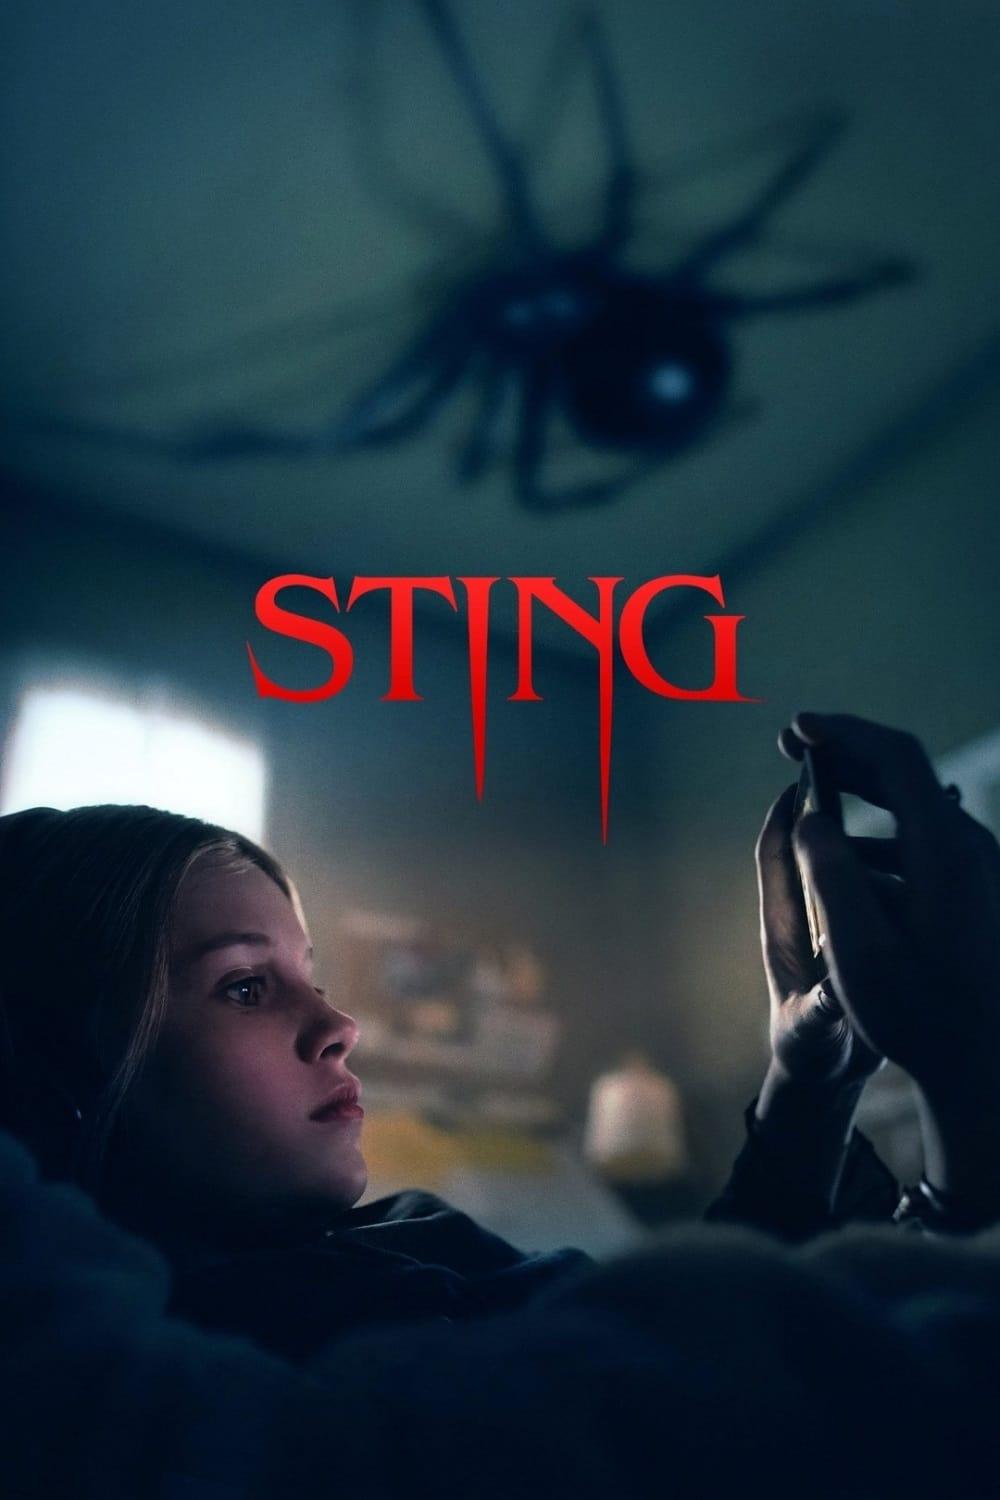 Movie poster of "Sting"